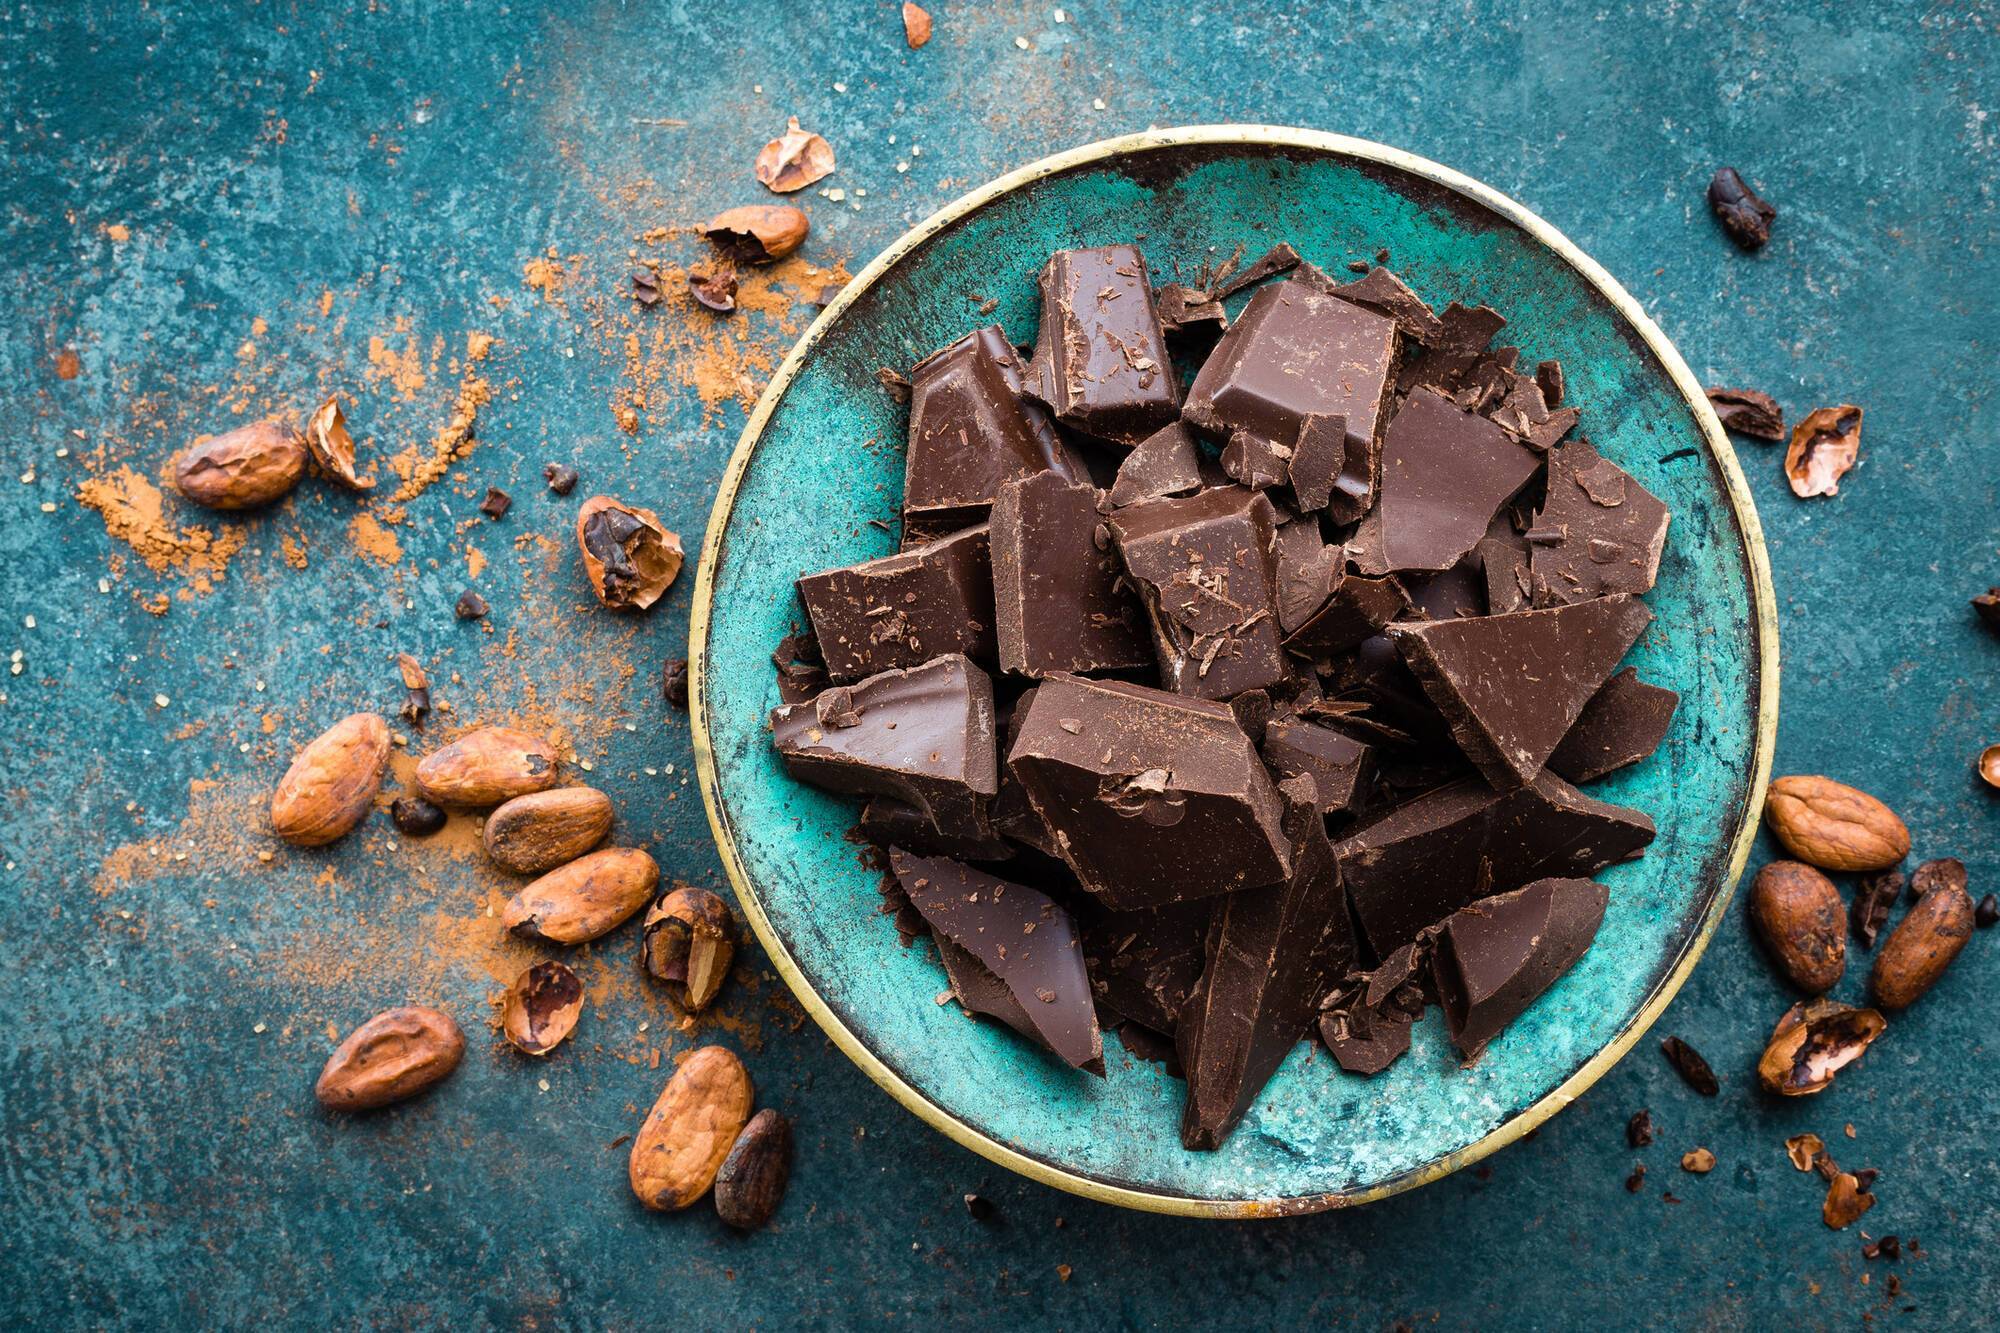 Experts told about the benefits of eating chocolate